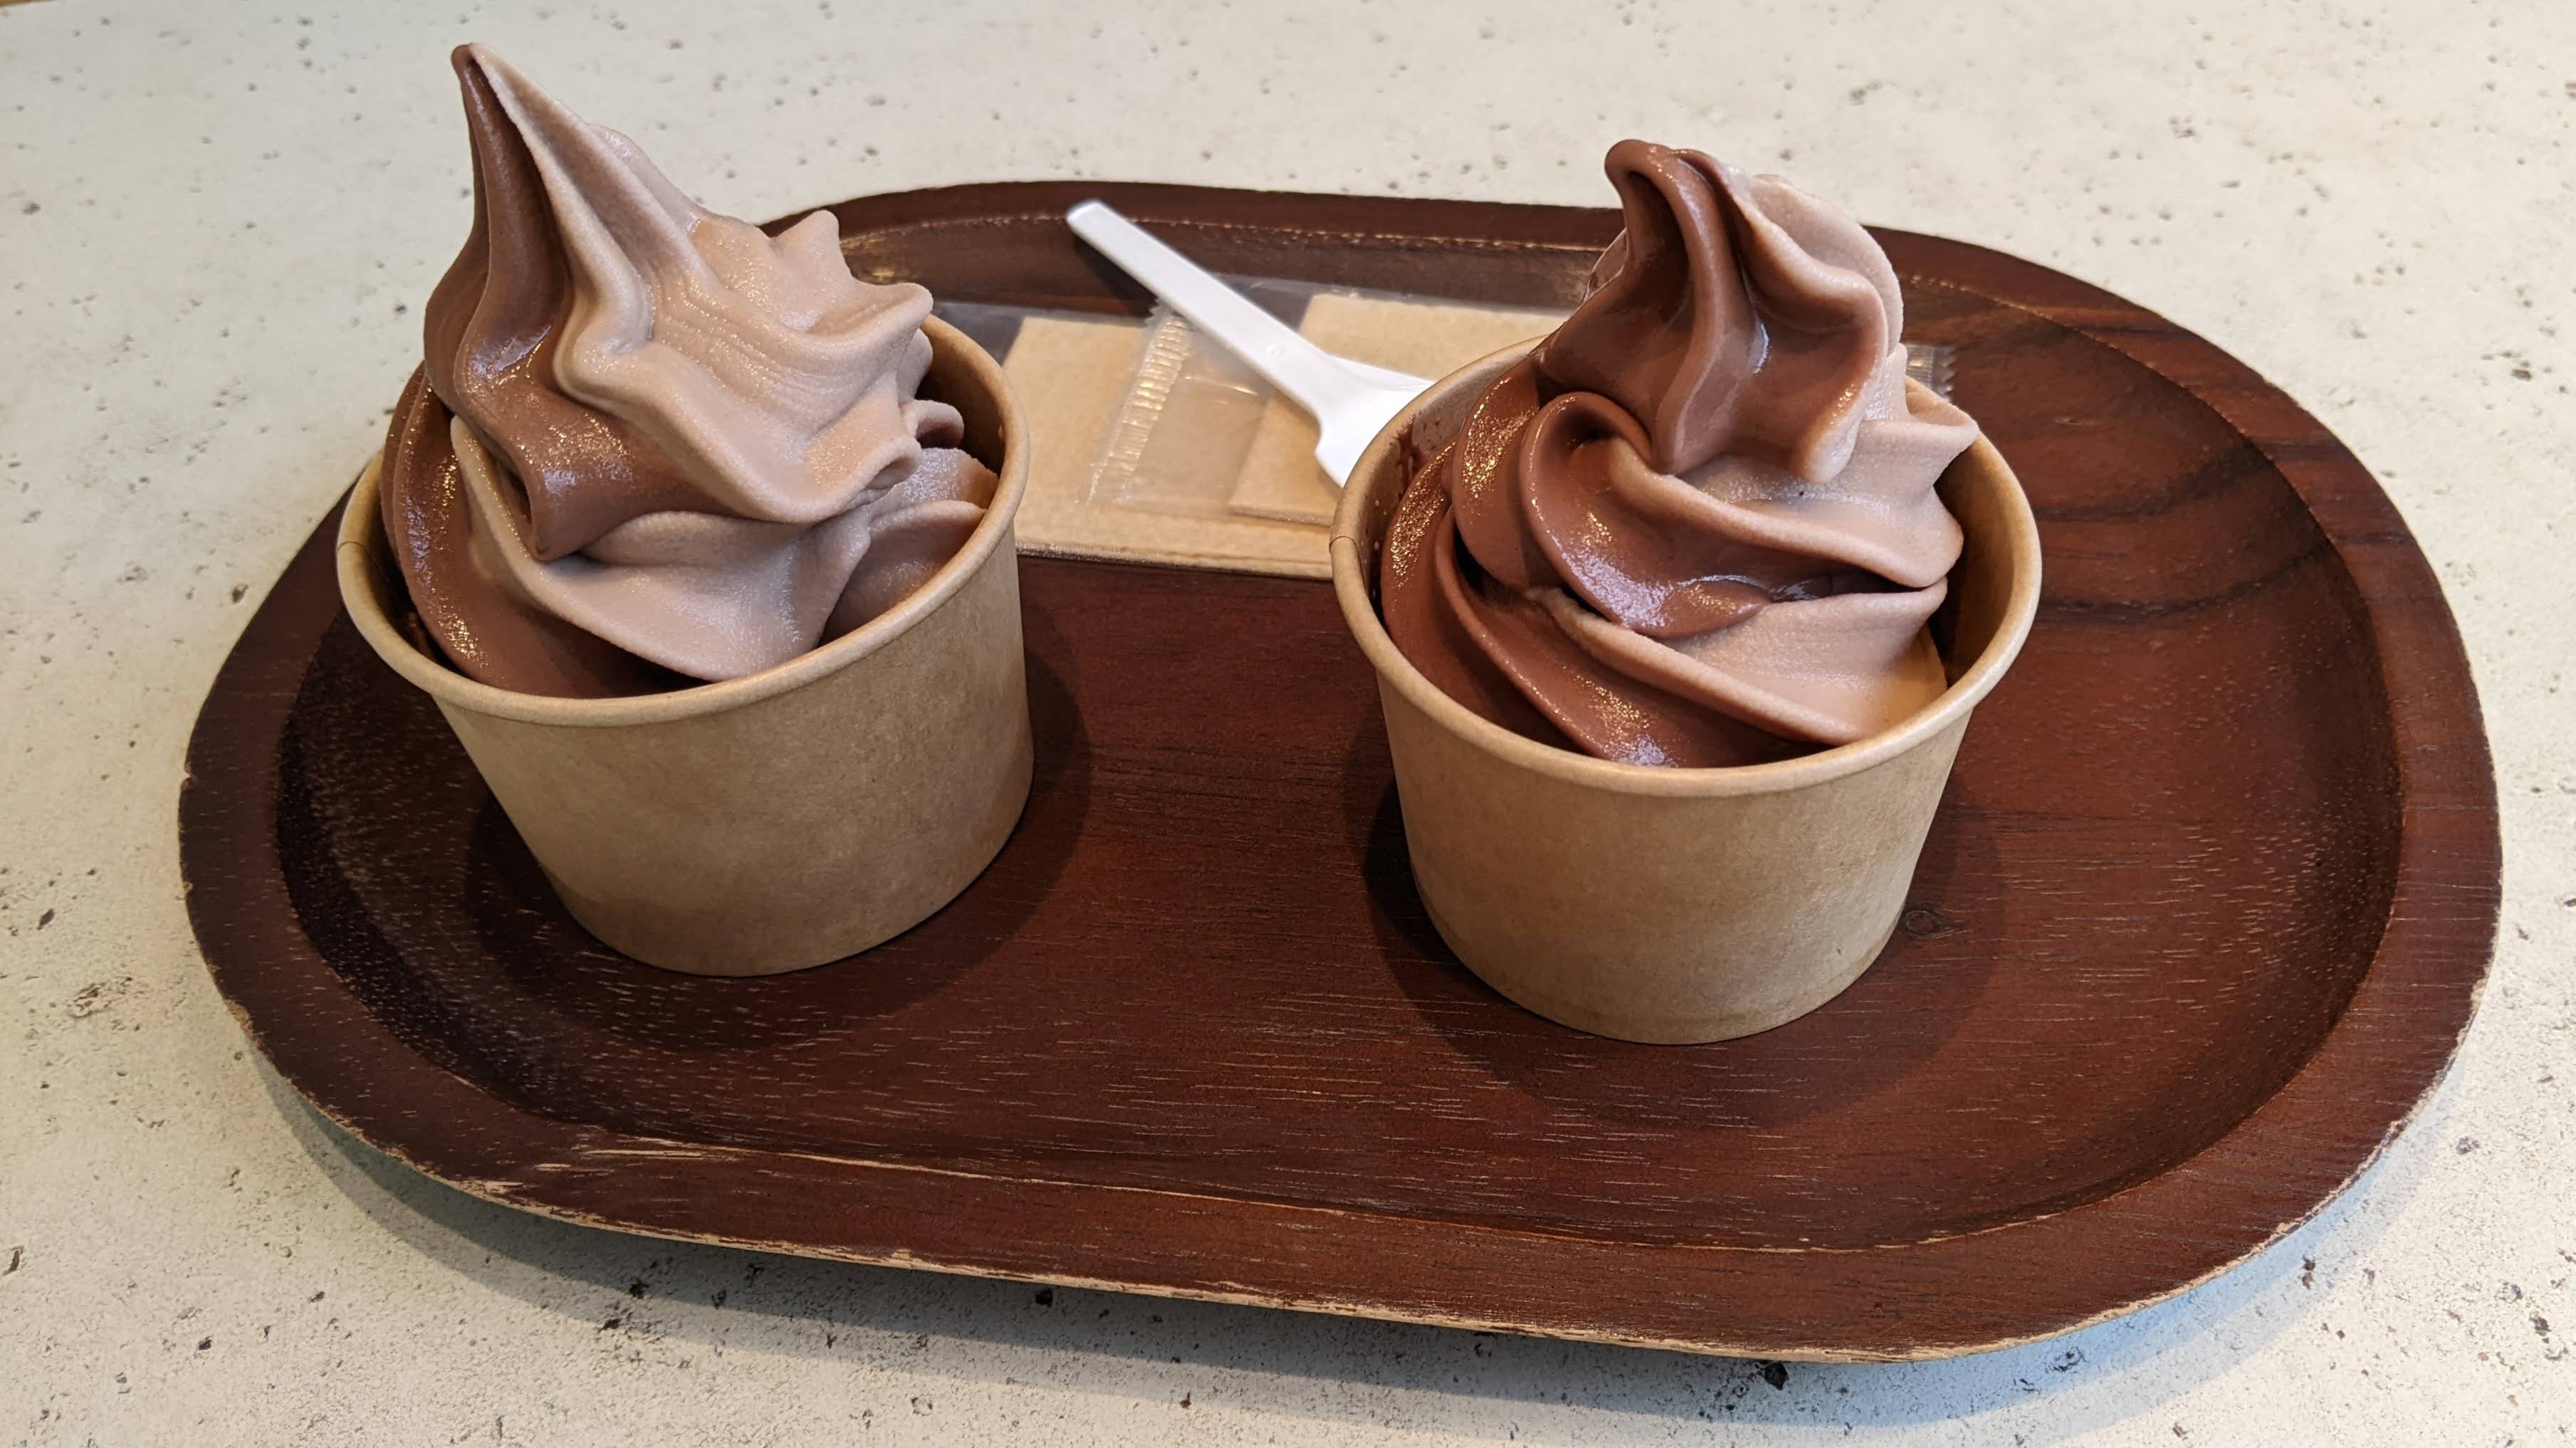 Cups of chocolate ice cream on a wooden tray